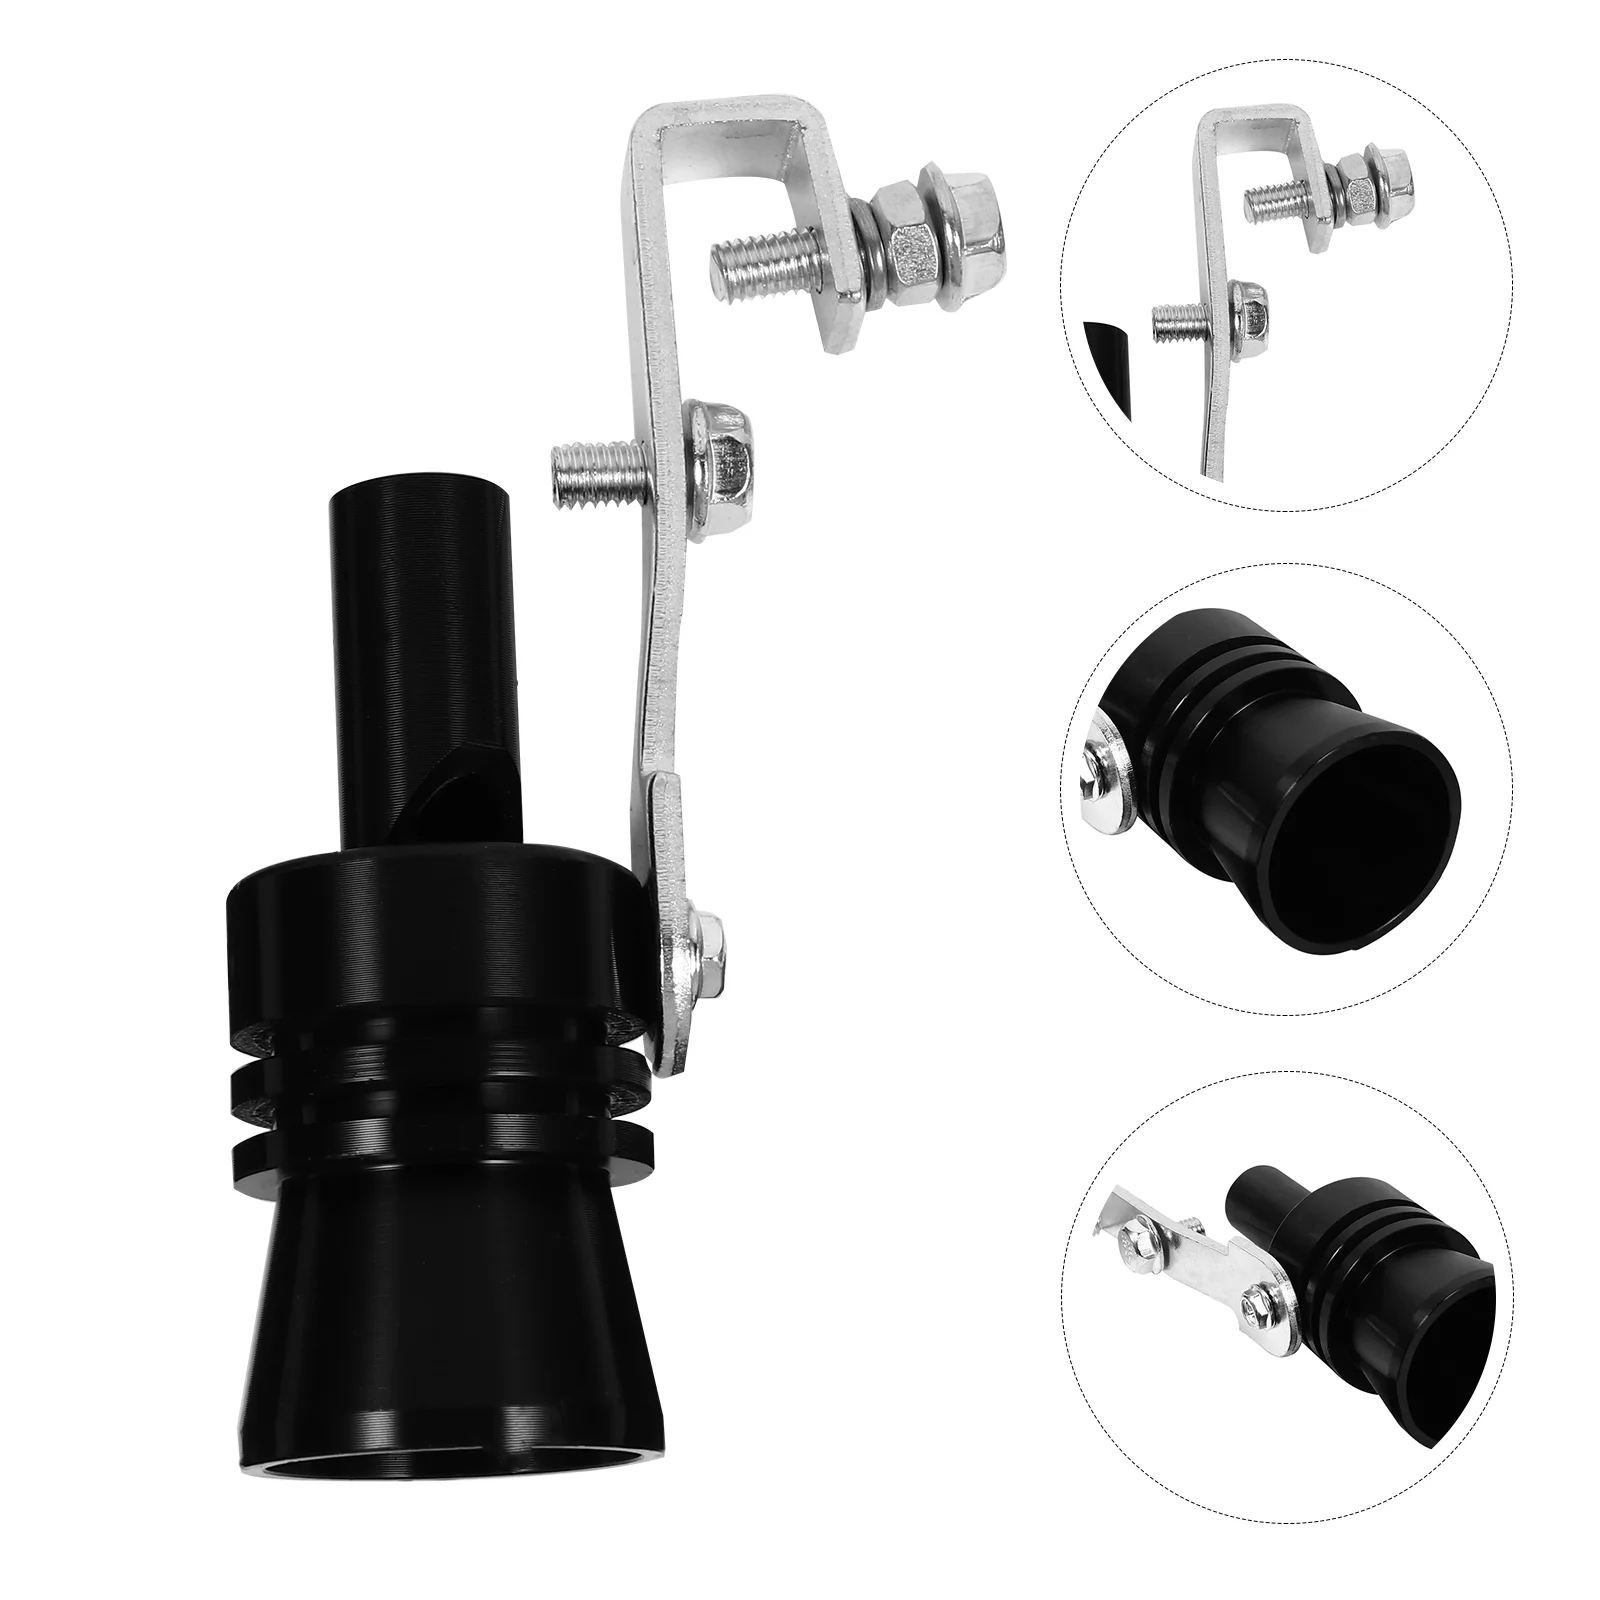 

Valve Blow Whistle Turbo Exhaust Muffler Pipe Car Tailpipe Simulator Sounder Motorcycle Stereo